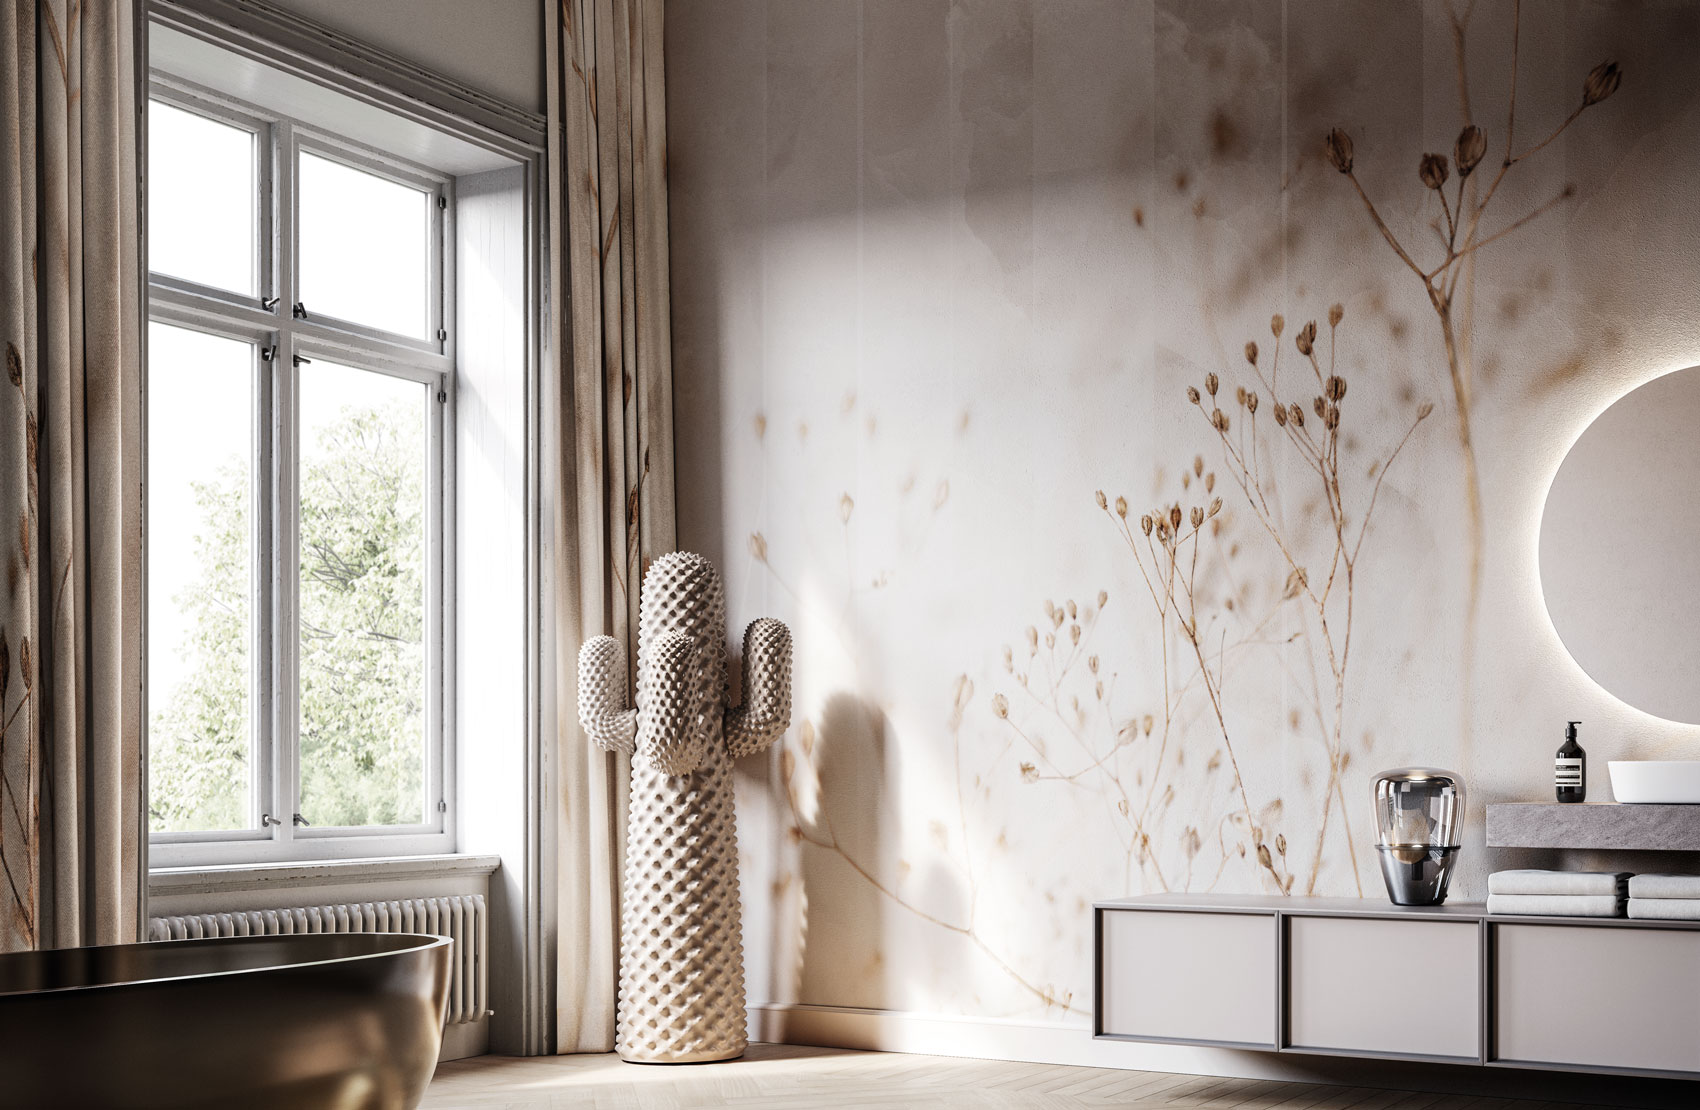 White Wallpaper adds a touch of class that infuses light and elegance into spaces. Discover the exclusive Instabilelab collection.